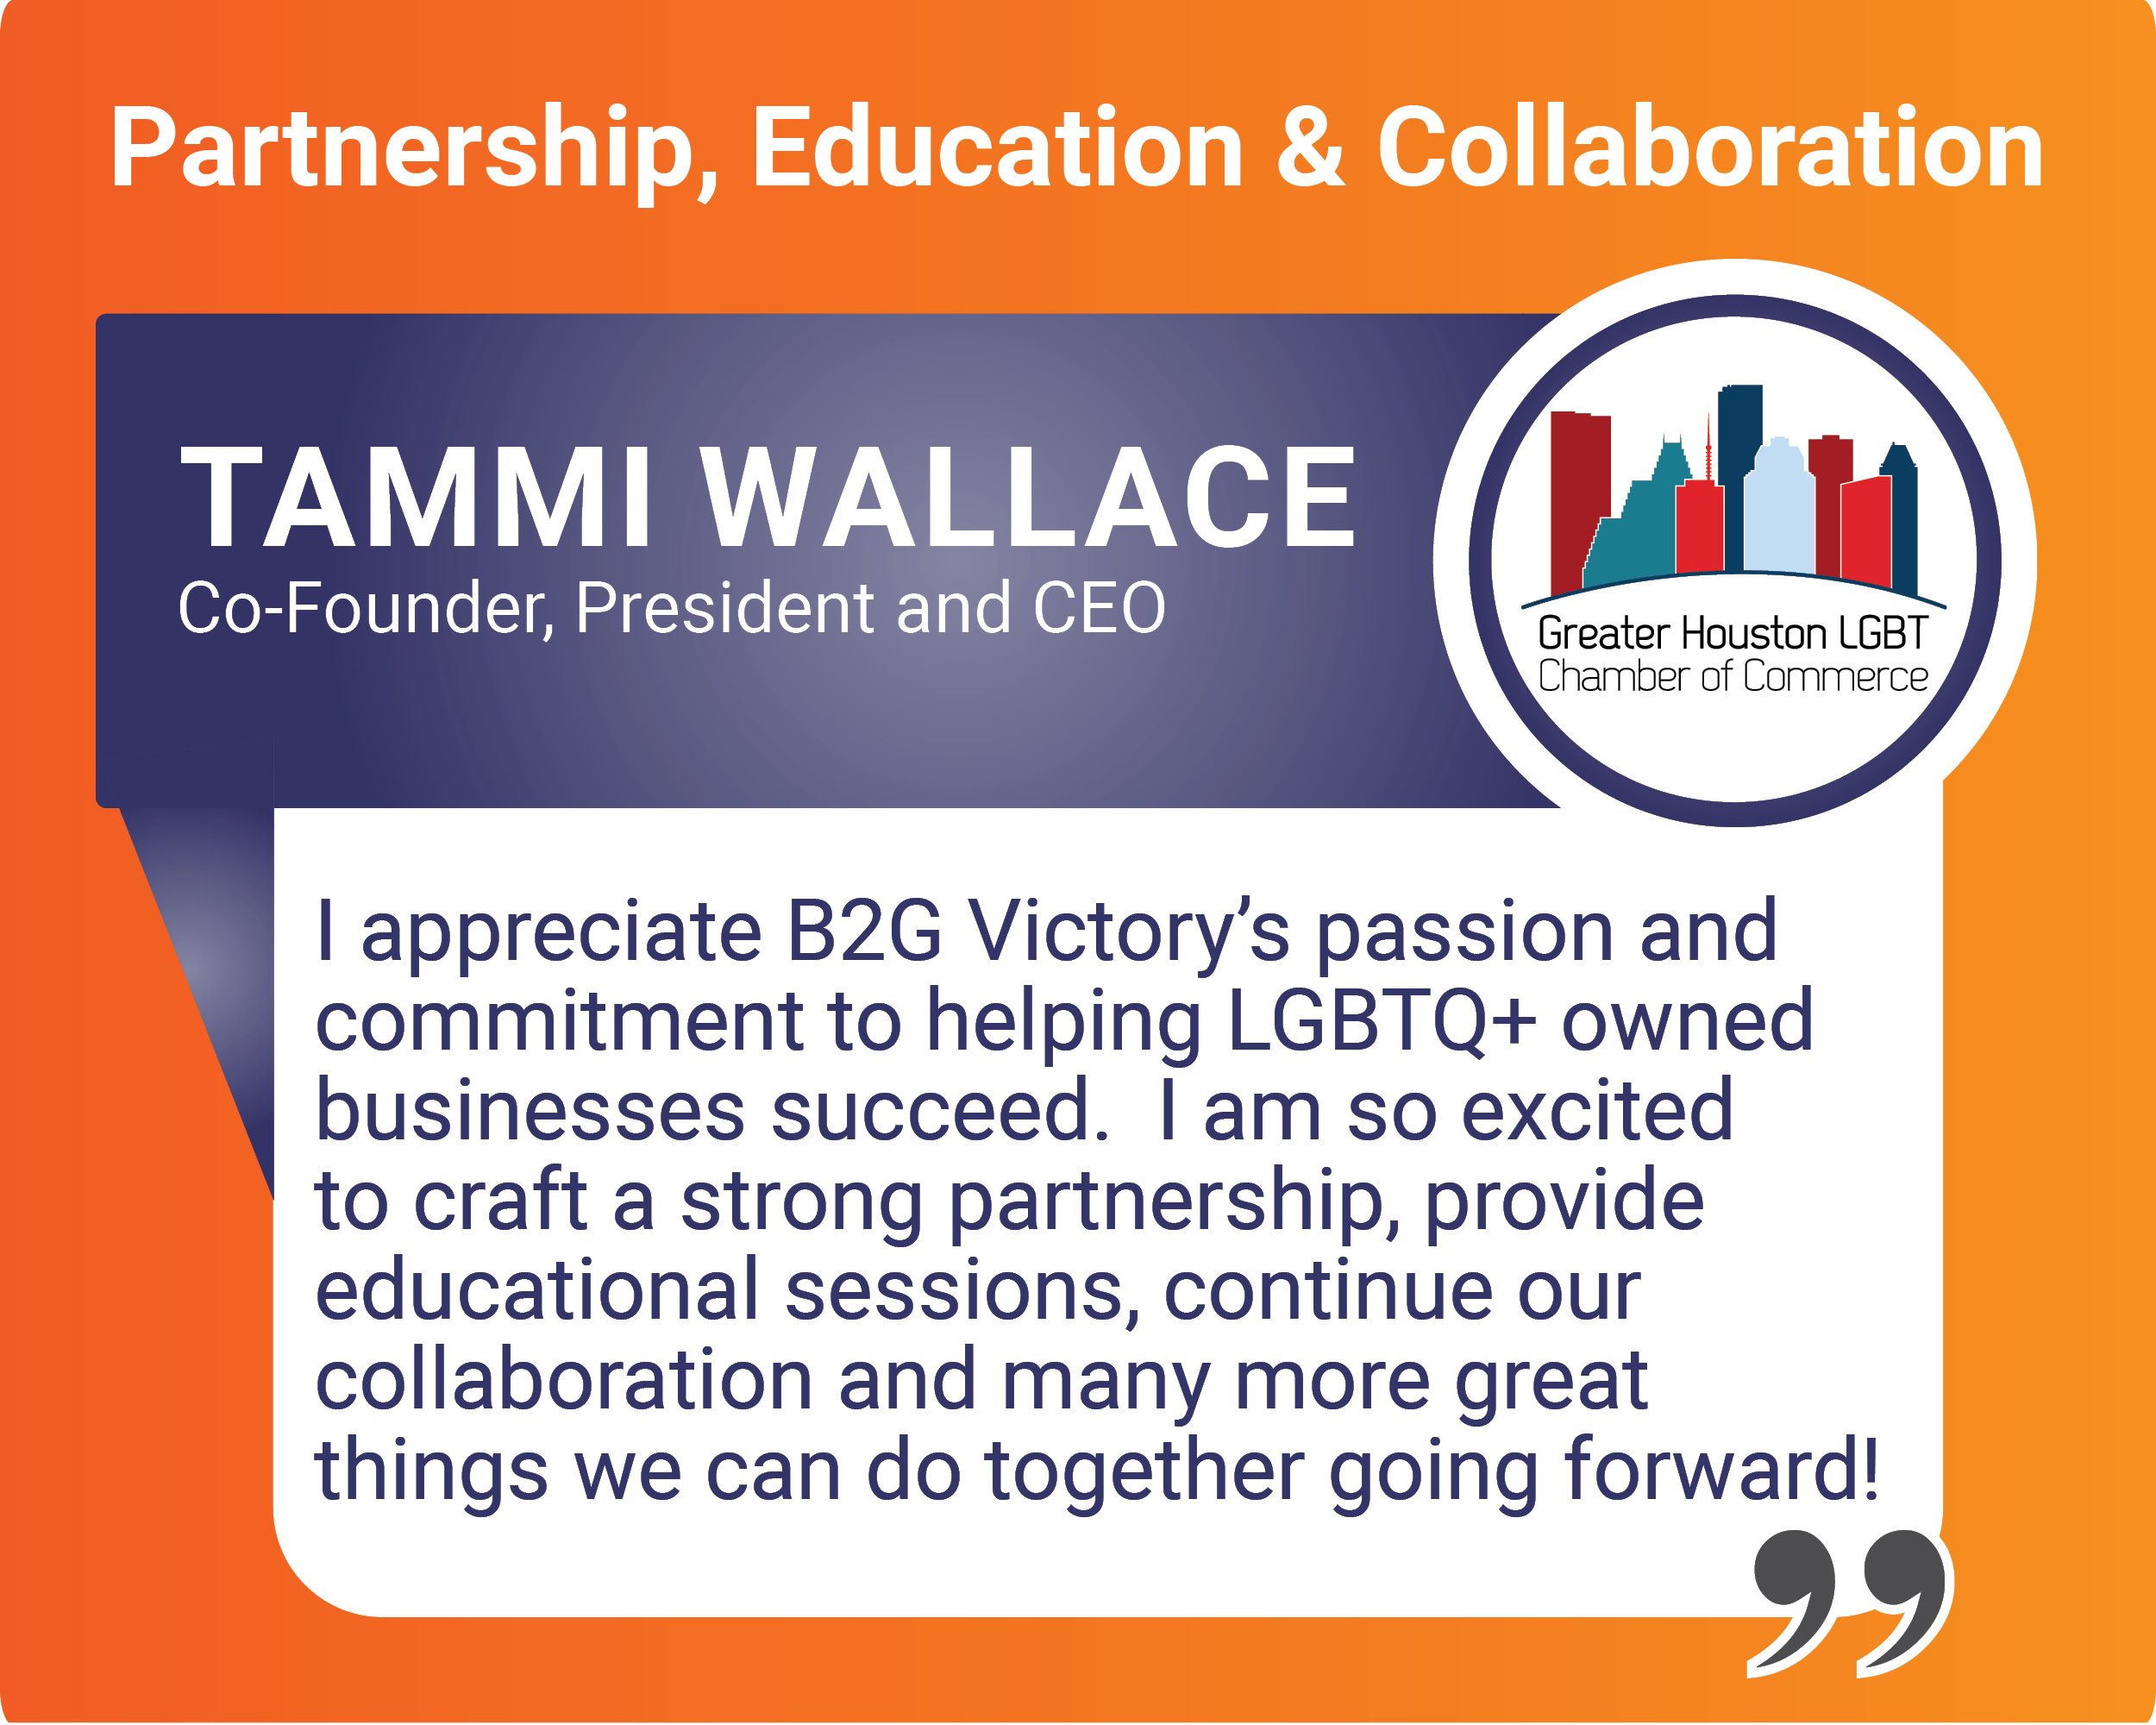 Testimonial from Tammi Wallace of the Greater Houston LGBT Chamber of Commerce